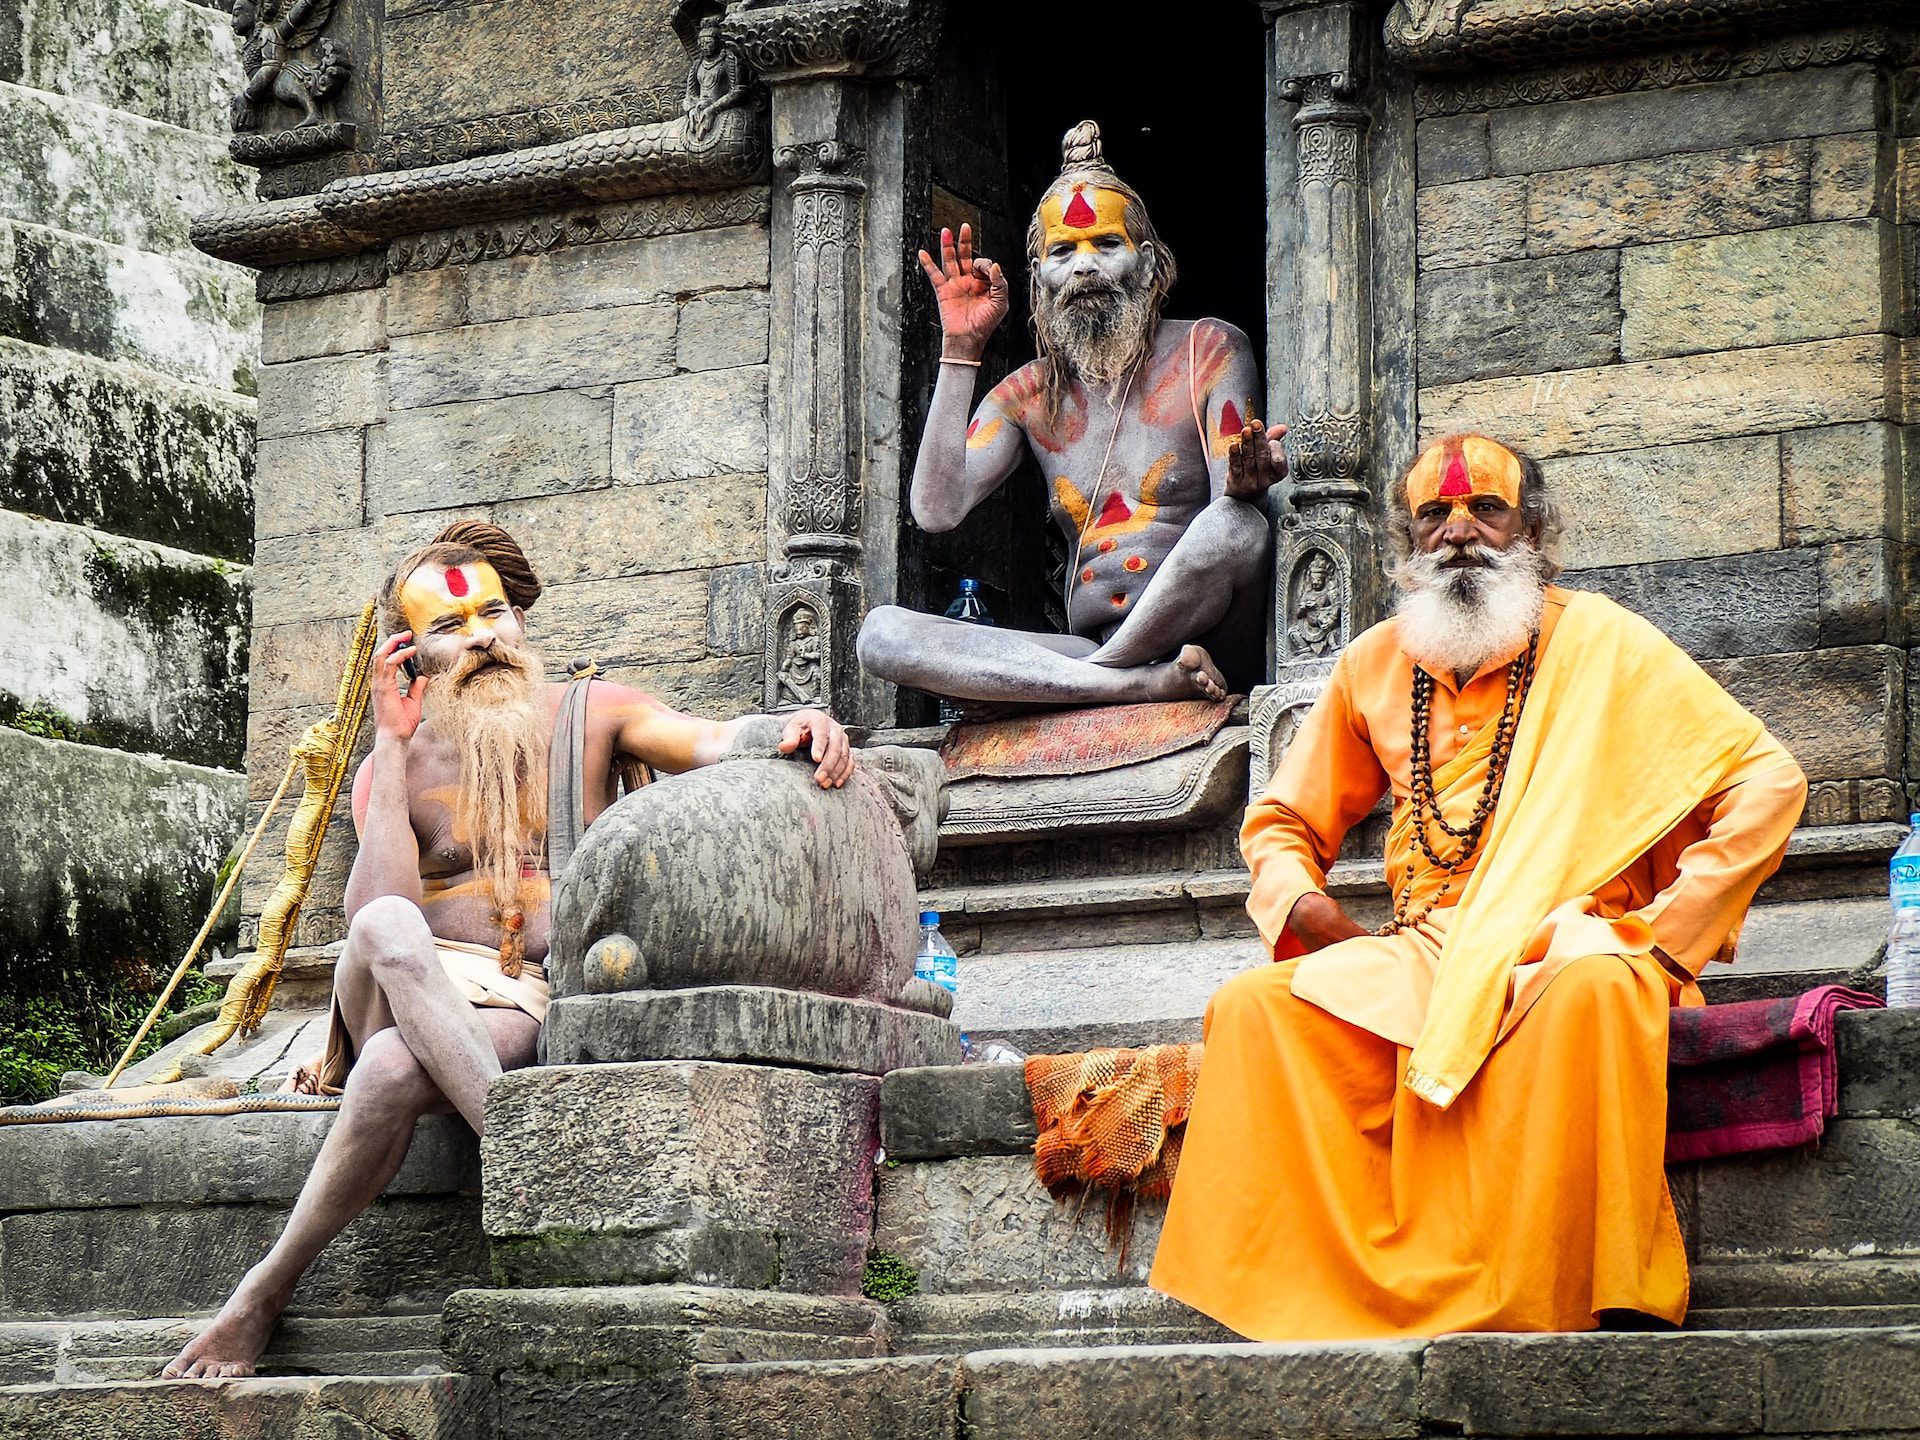 The holy men of Pashupatinath Temple, dressed in yellow robes and with orange and yellow paint on their faces.